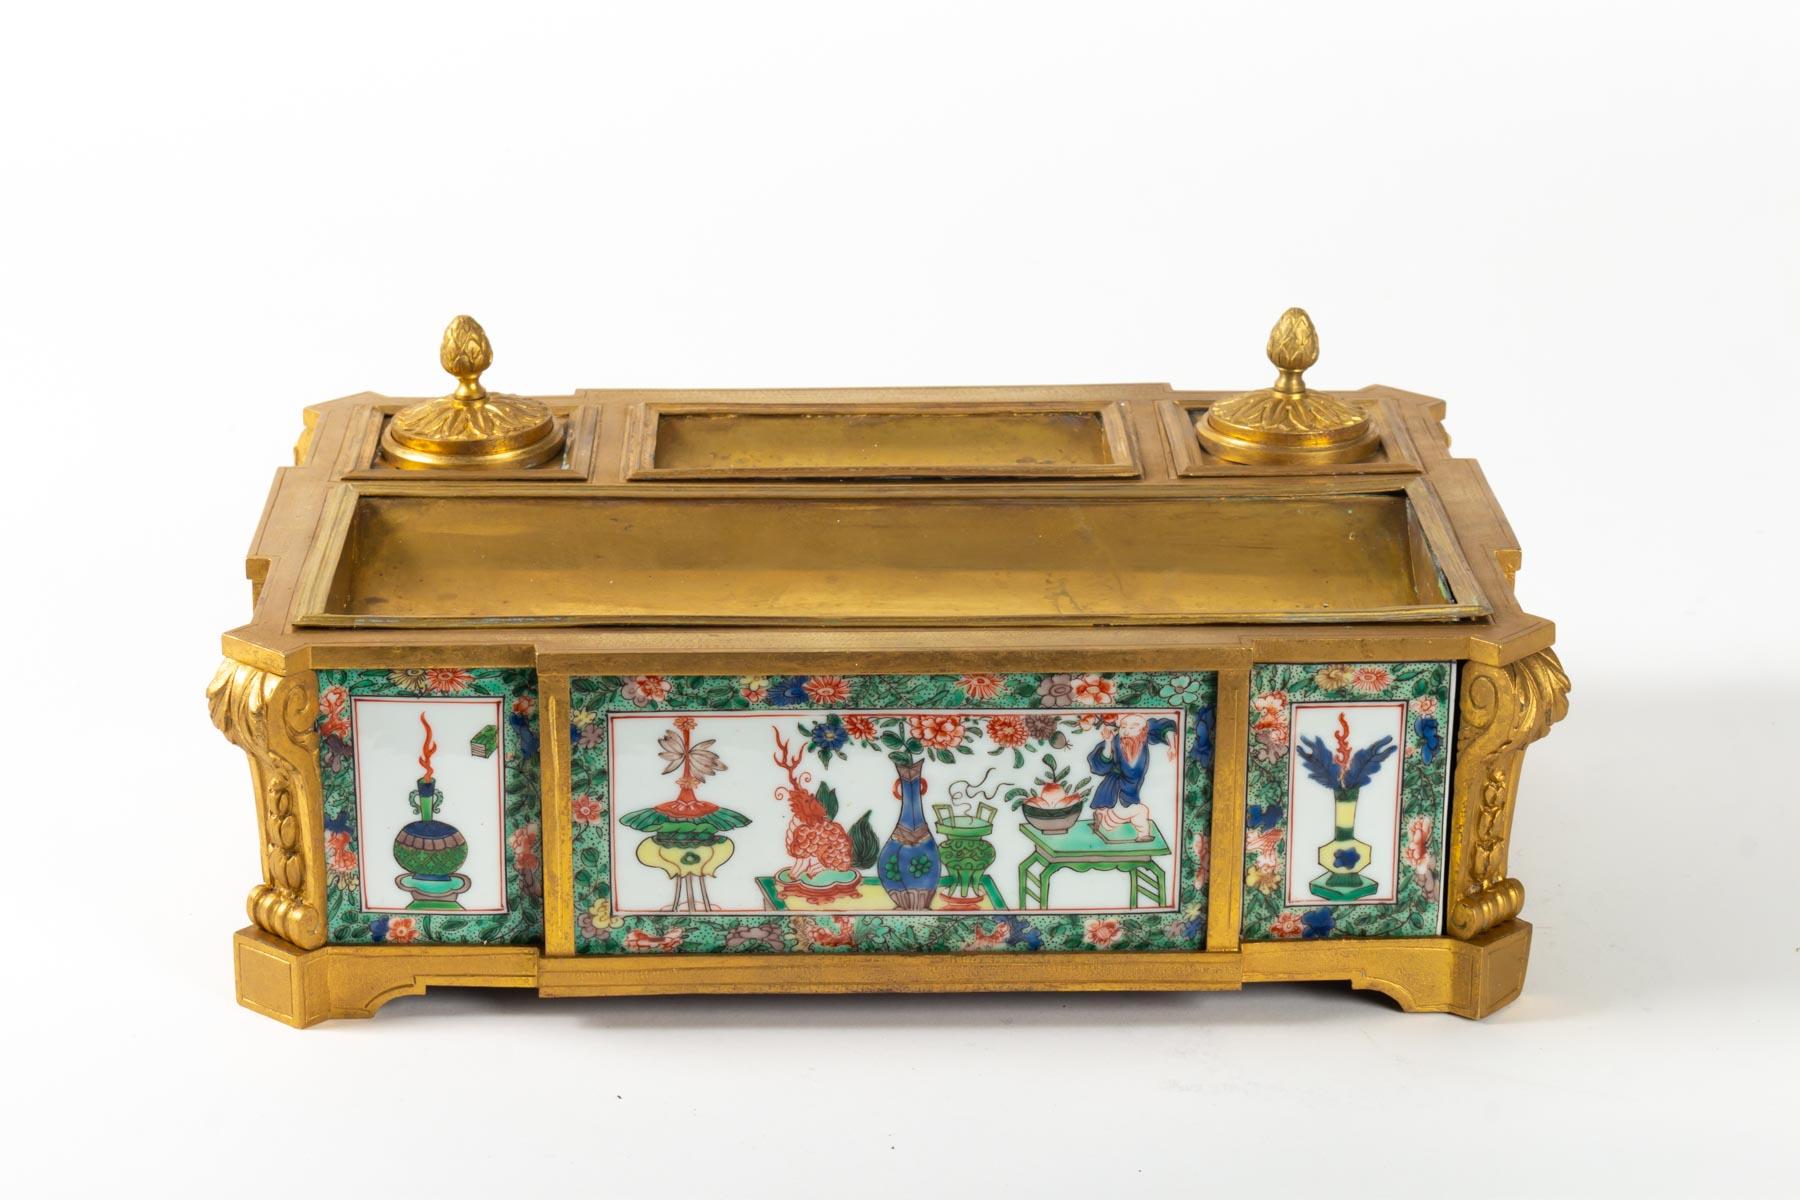 Exceptional and rare inkwell, gilded bronze, porcelain plates, France, mid-19th century, Napoleon III period, in the taste of 